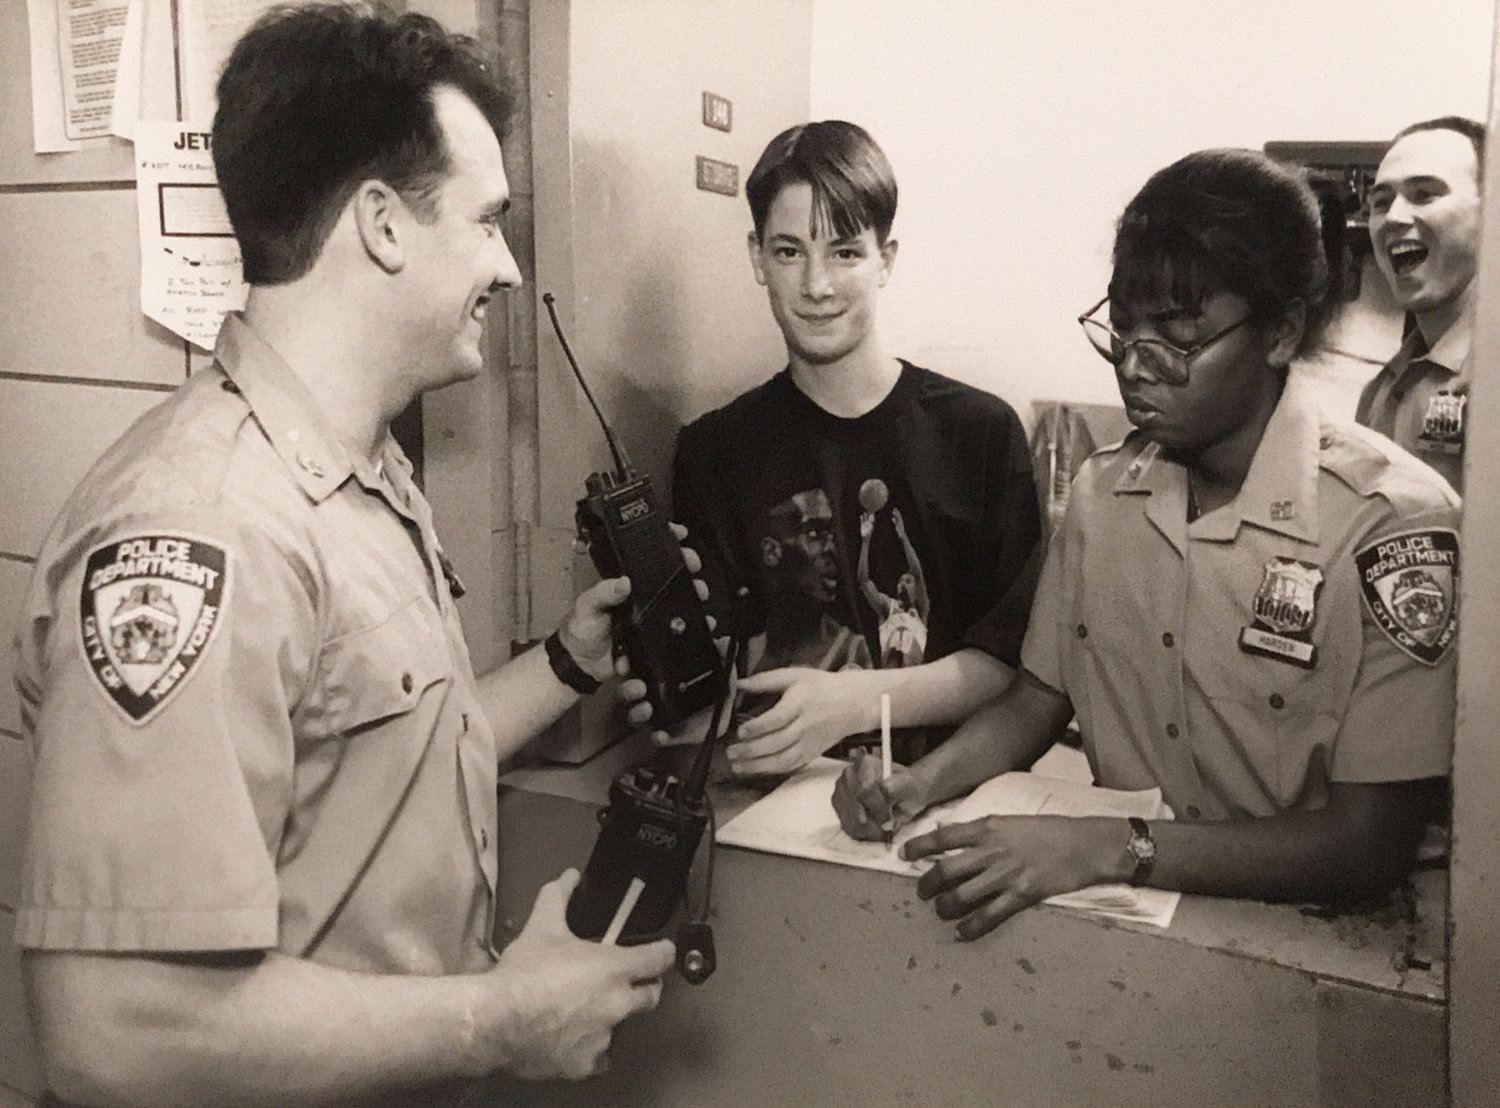 Local school student Kevin Brown was 'commissioner for a day' of the 50th Precinct back in May 1994. After a roll call and an inspection, 'Commissioner' Brown handed out radios with Officer Audrey Harden to fellow officers like Rich Gleason.